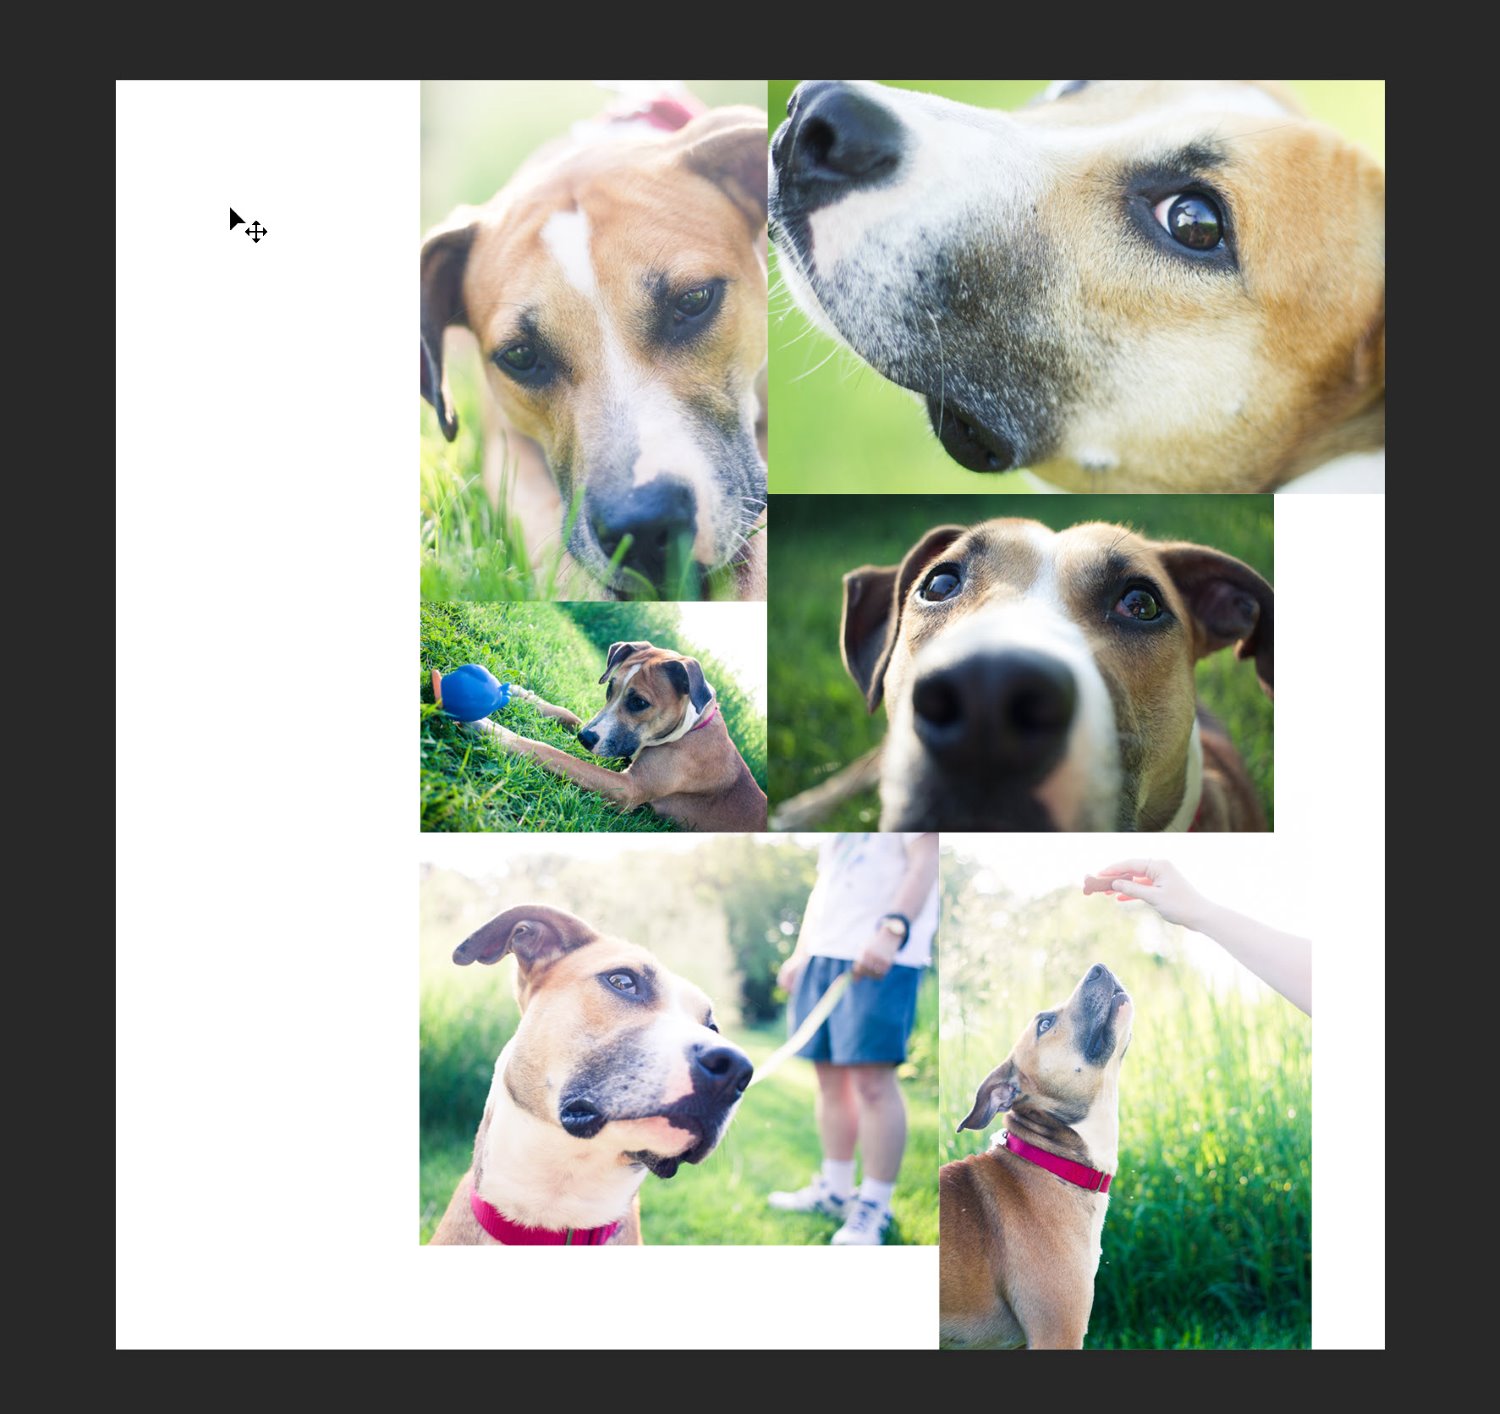 another version of the pet collage in Photoshop